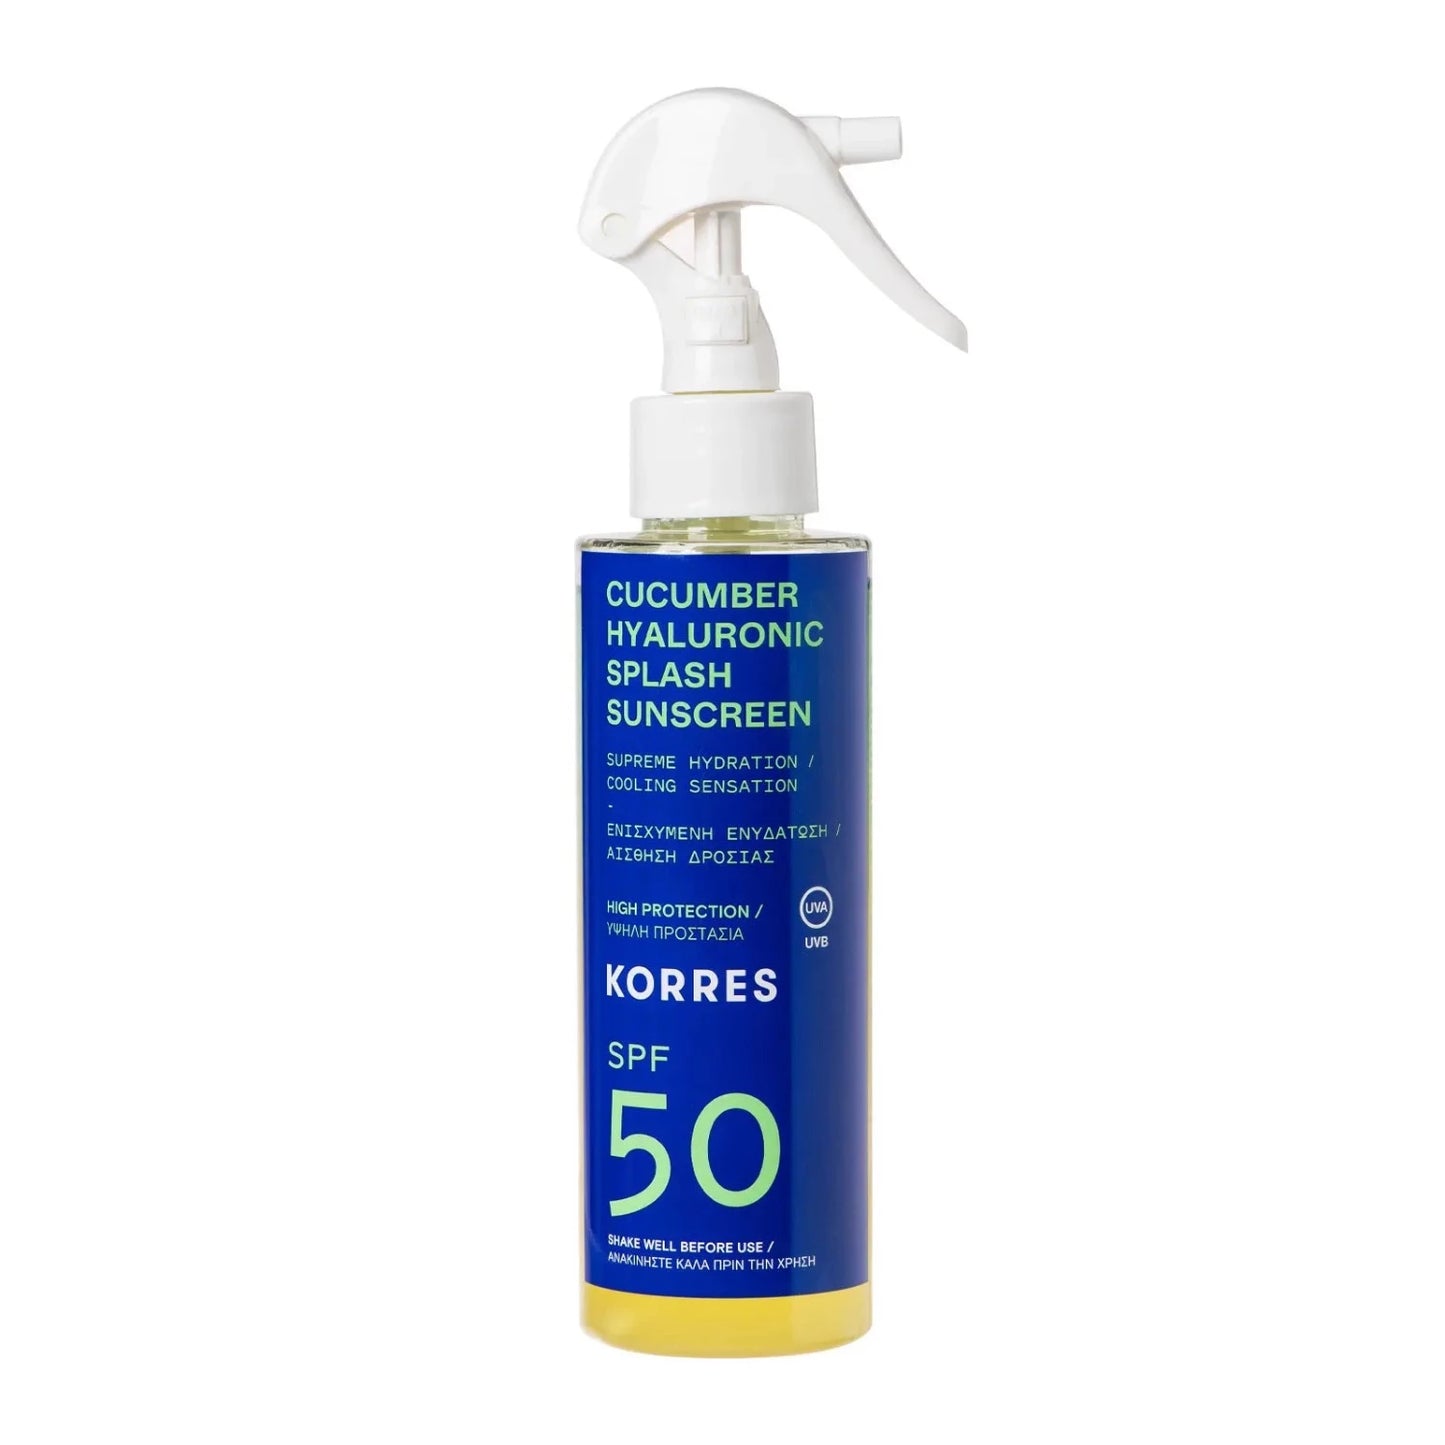 Korres Cucumber Hyaluronic Splash Sunscreen SPF50 is enriched with hyaluronic acid, organic cucumber extract and panthenol to cool, hydrate and protect the skin from the sun with SPF 50.